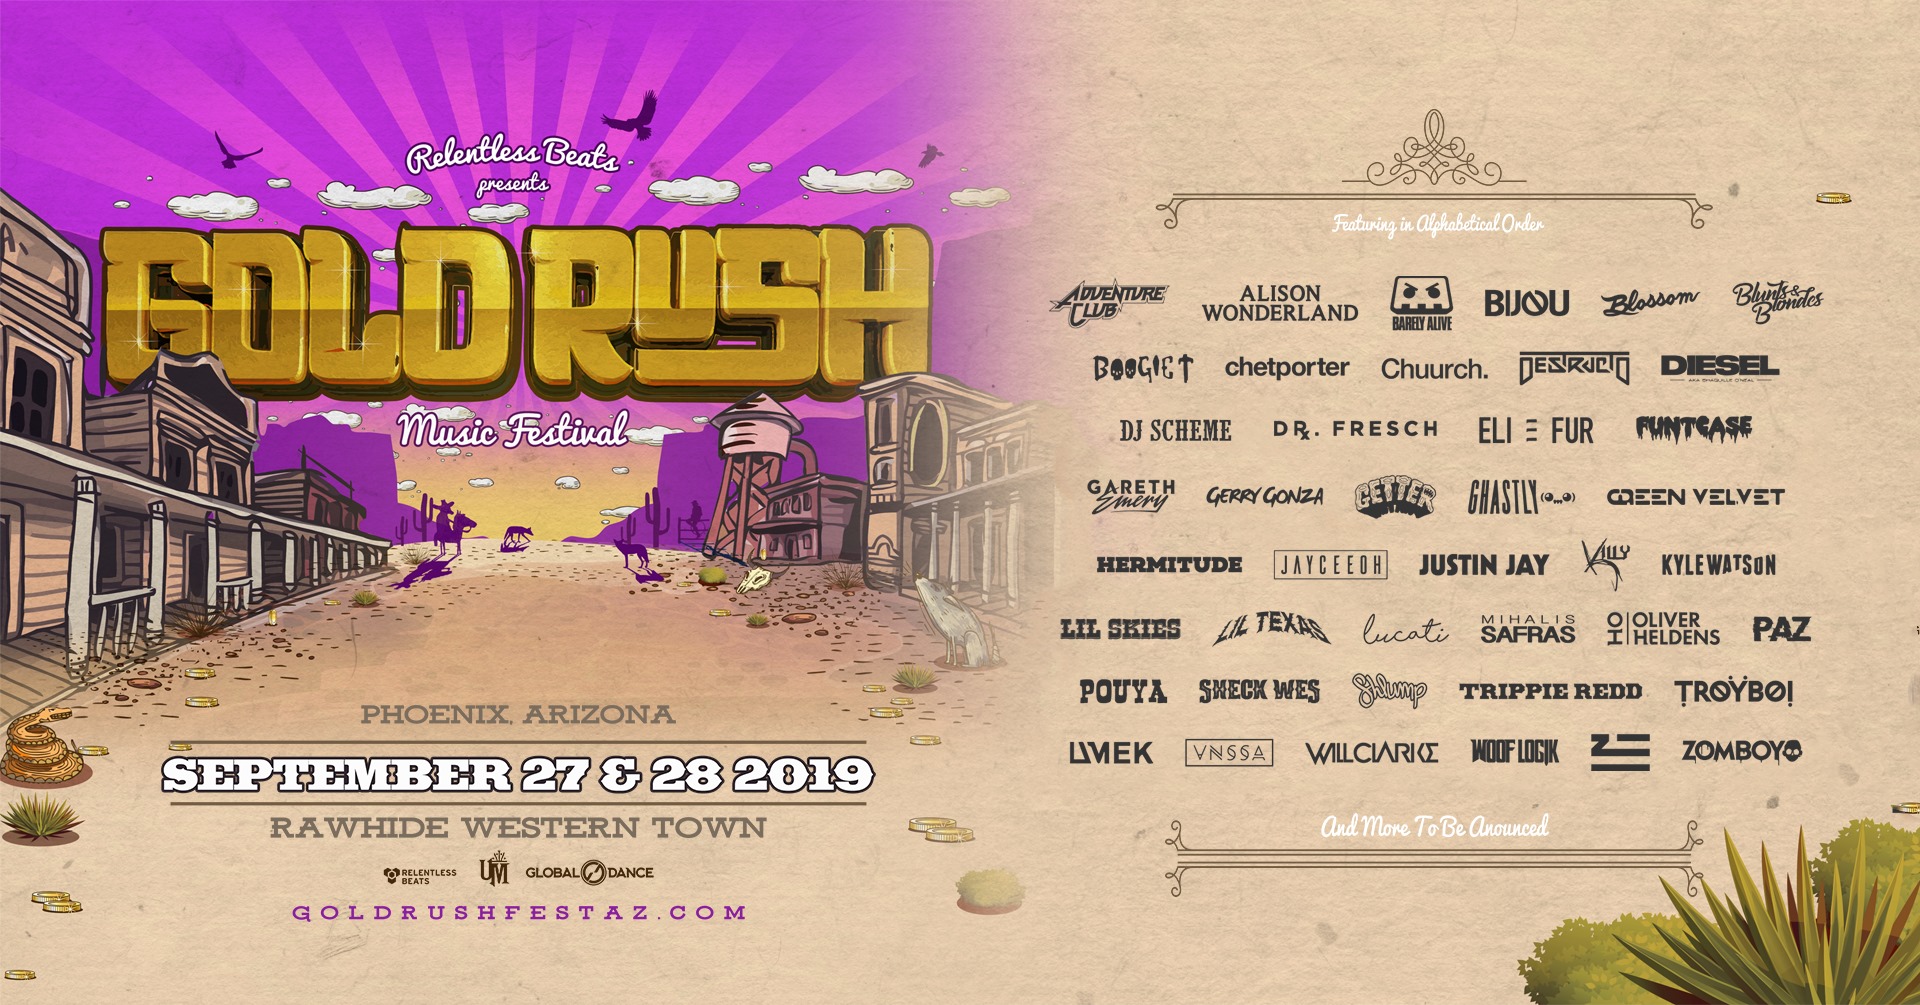 GOLDRUSH: NEON DREAMS PHASE 02 LINEUP AND ARTIST-BY-DAY ANNOUNCED